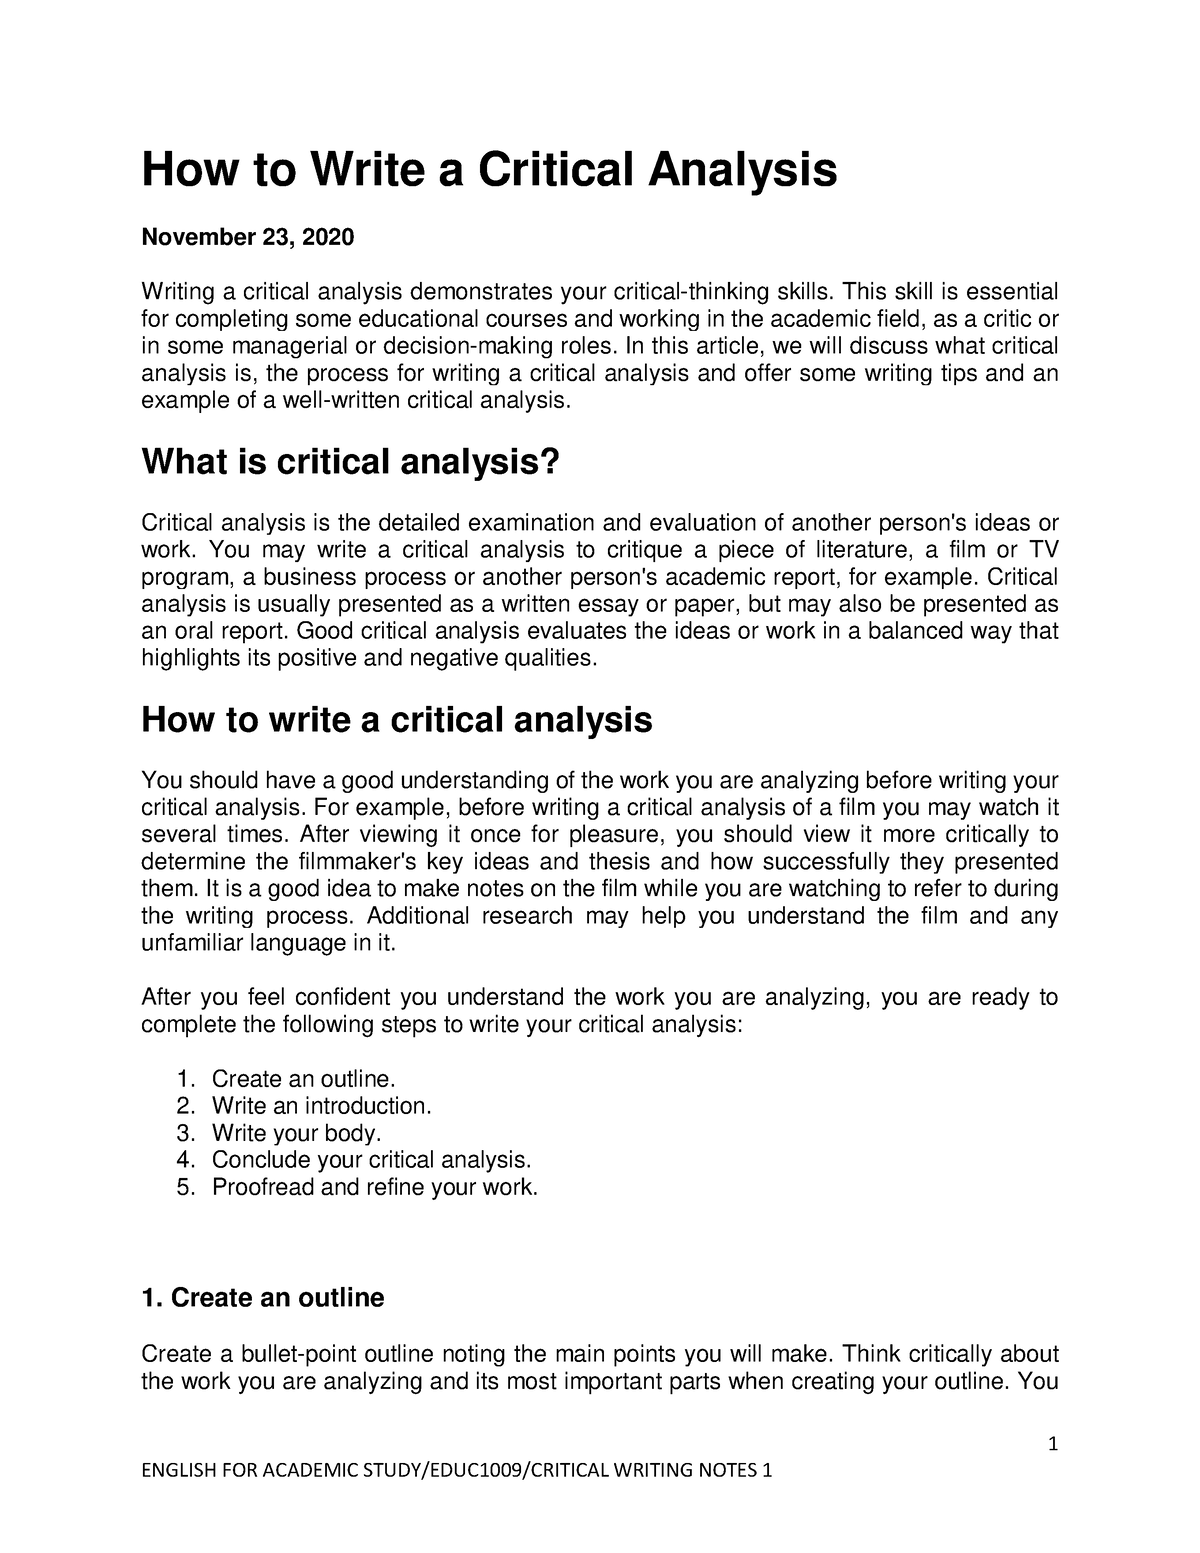 How To Write a Critical Analysis in 5 Steps (With Tips)